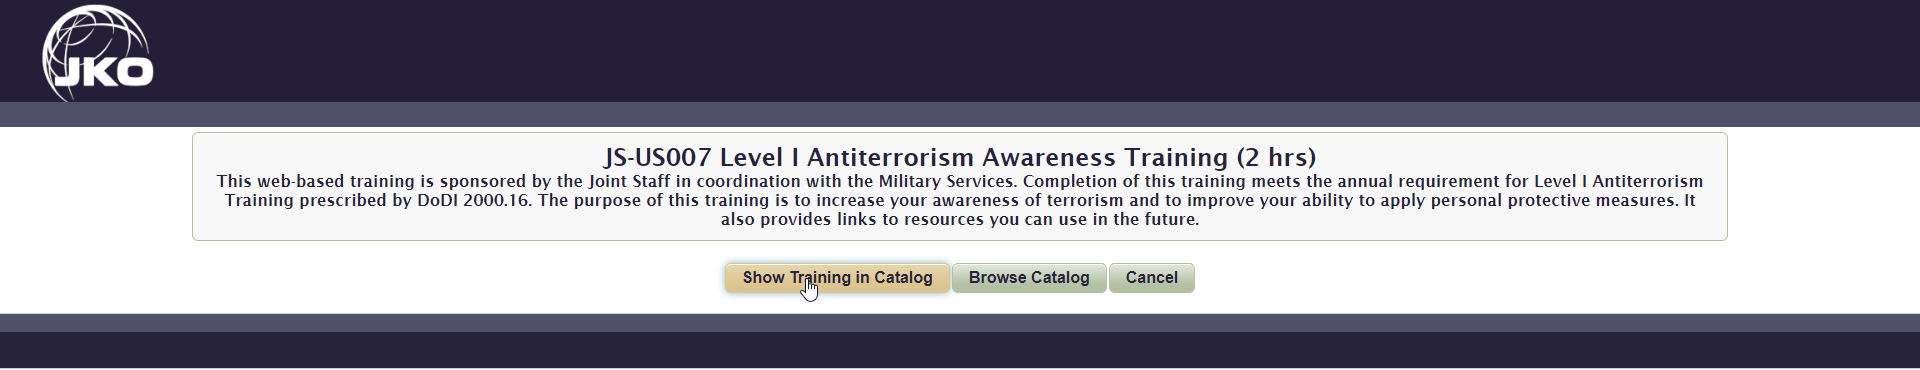 Screen capture of CAC enabled training that reads - JS-US007 Level I Antiterrorism Awareness Training (2 hrs) This web-based training is sponsored by the Joint Staff in coordination with the Military Services. Completion of this training meets the annual requirement for Level I Antiterrorism Training prescribed by DoDI 2000.16. The purpose of this training is to increase your awareness of terrorism and to improve your ability to apply personal protective measures. It also provides links to resources you can use in the future.